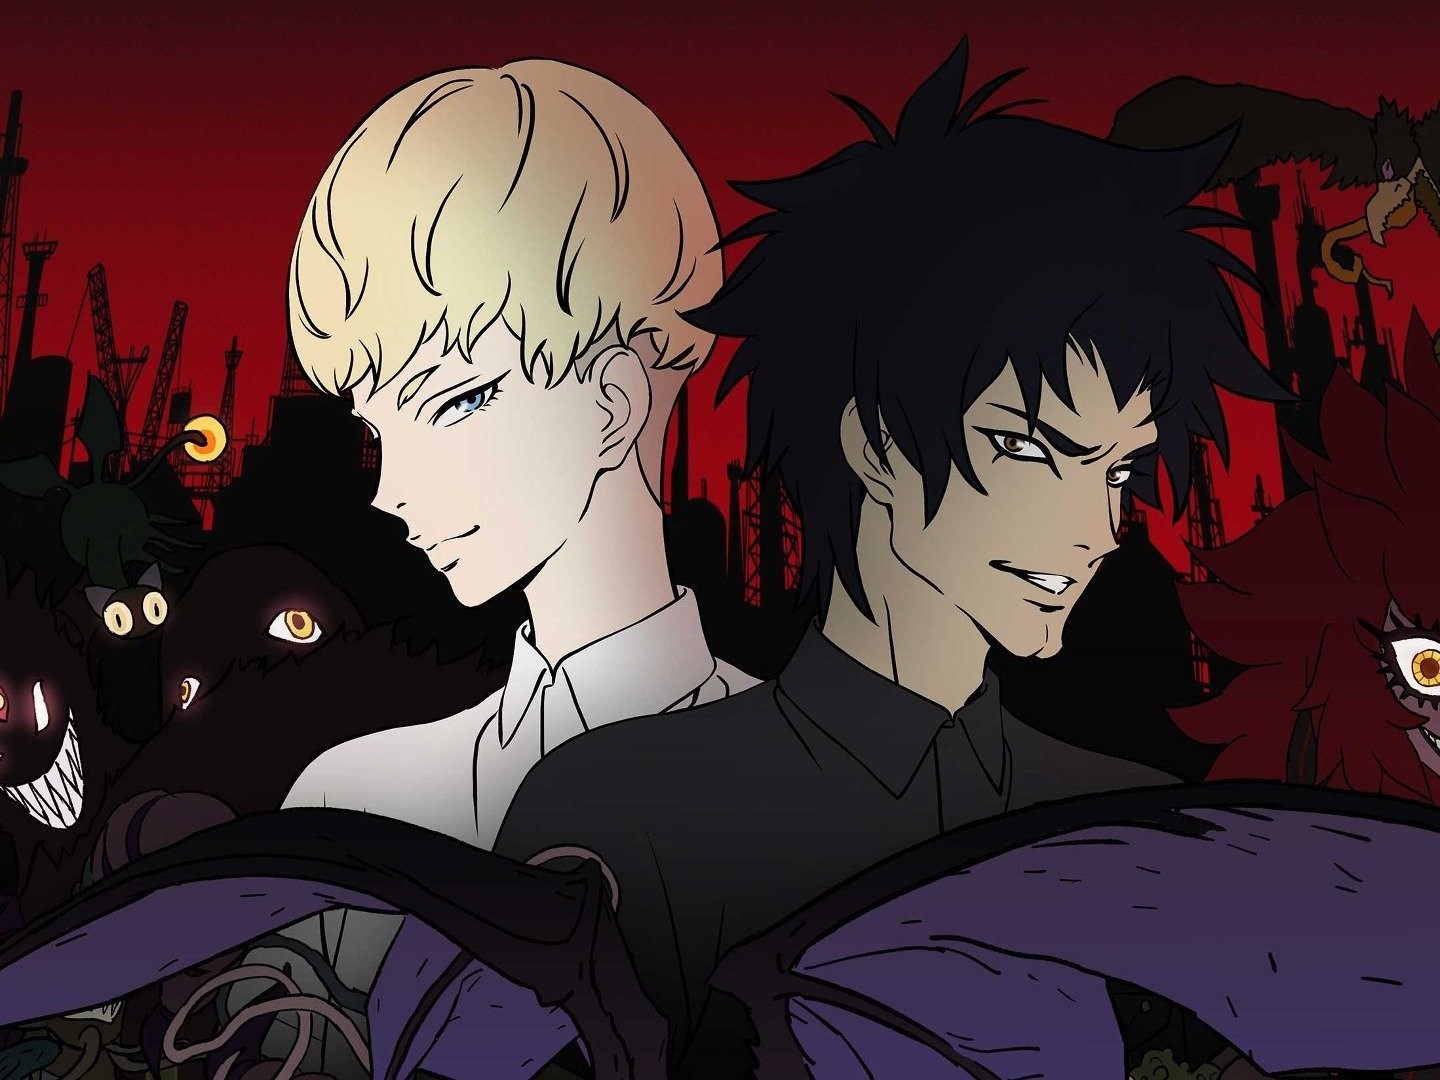 Devilman Crybaby (2018): ratings and release dates for each episode